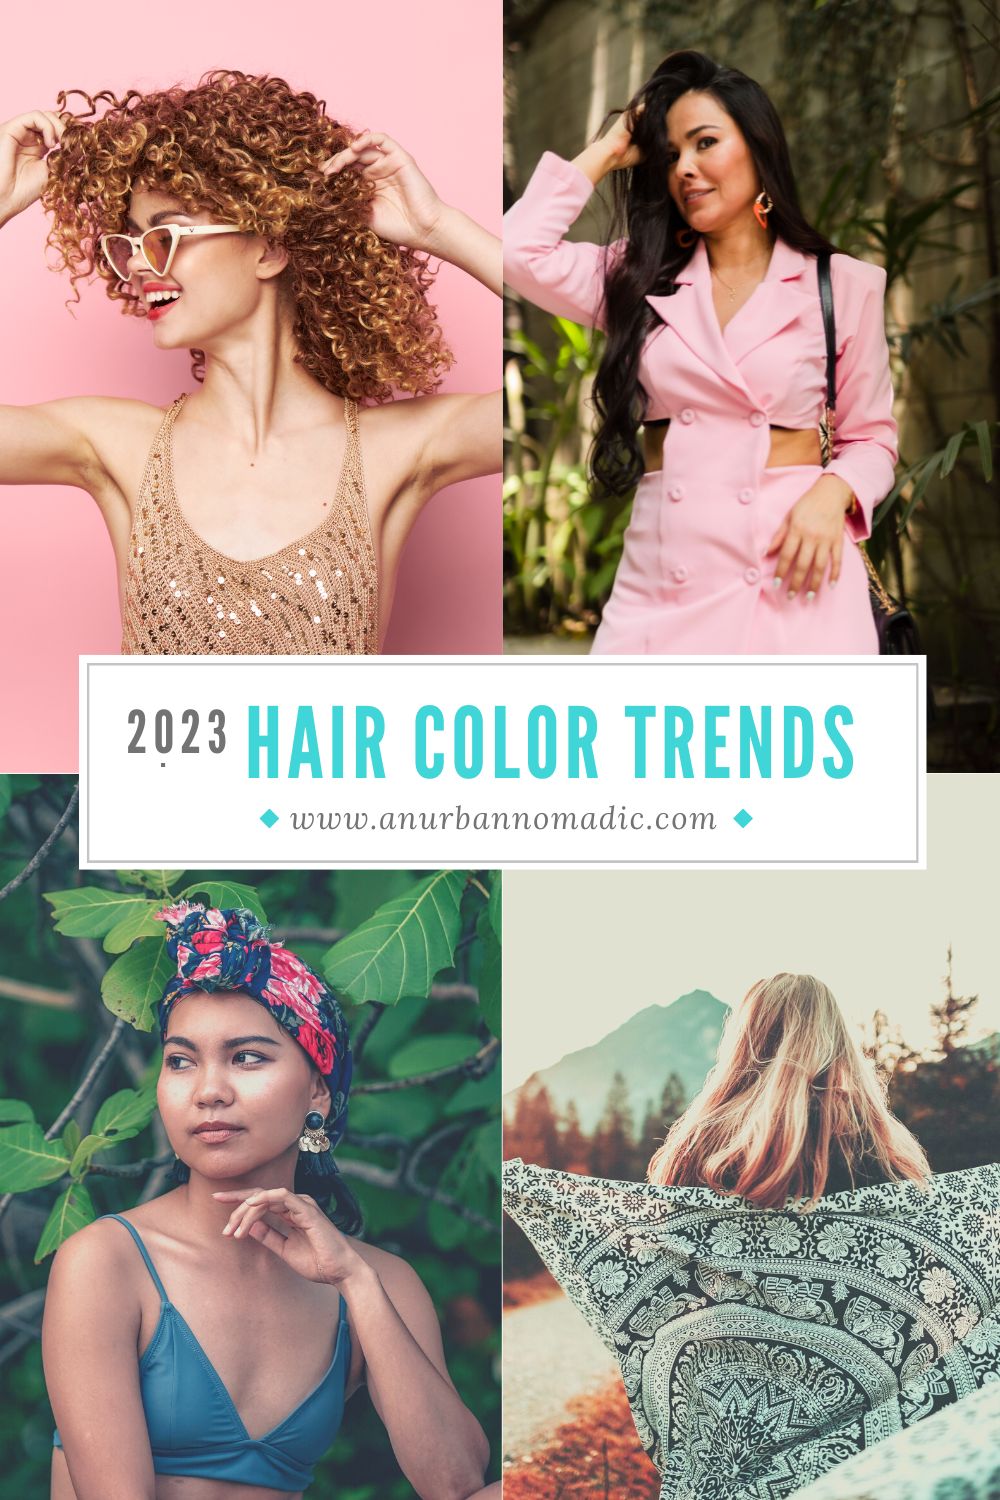 Hair trends ideas 2023. Best hair colors and hair colors trends for 2023.